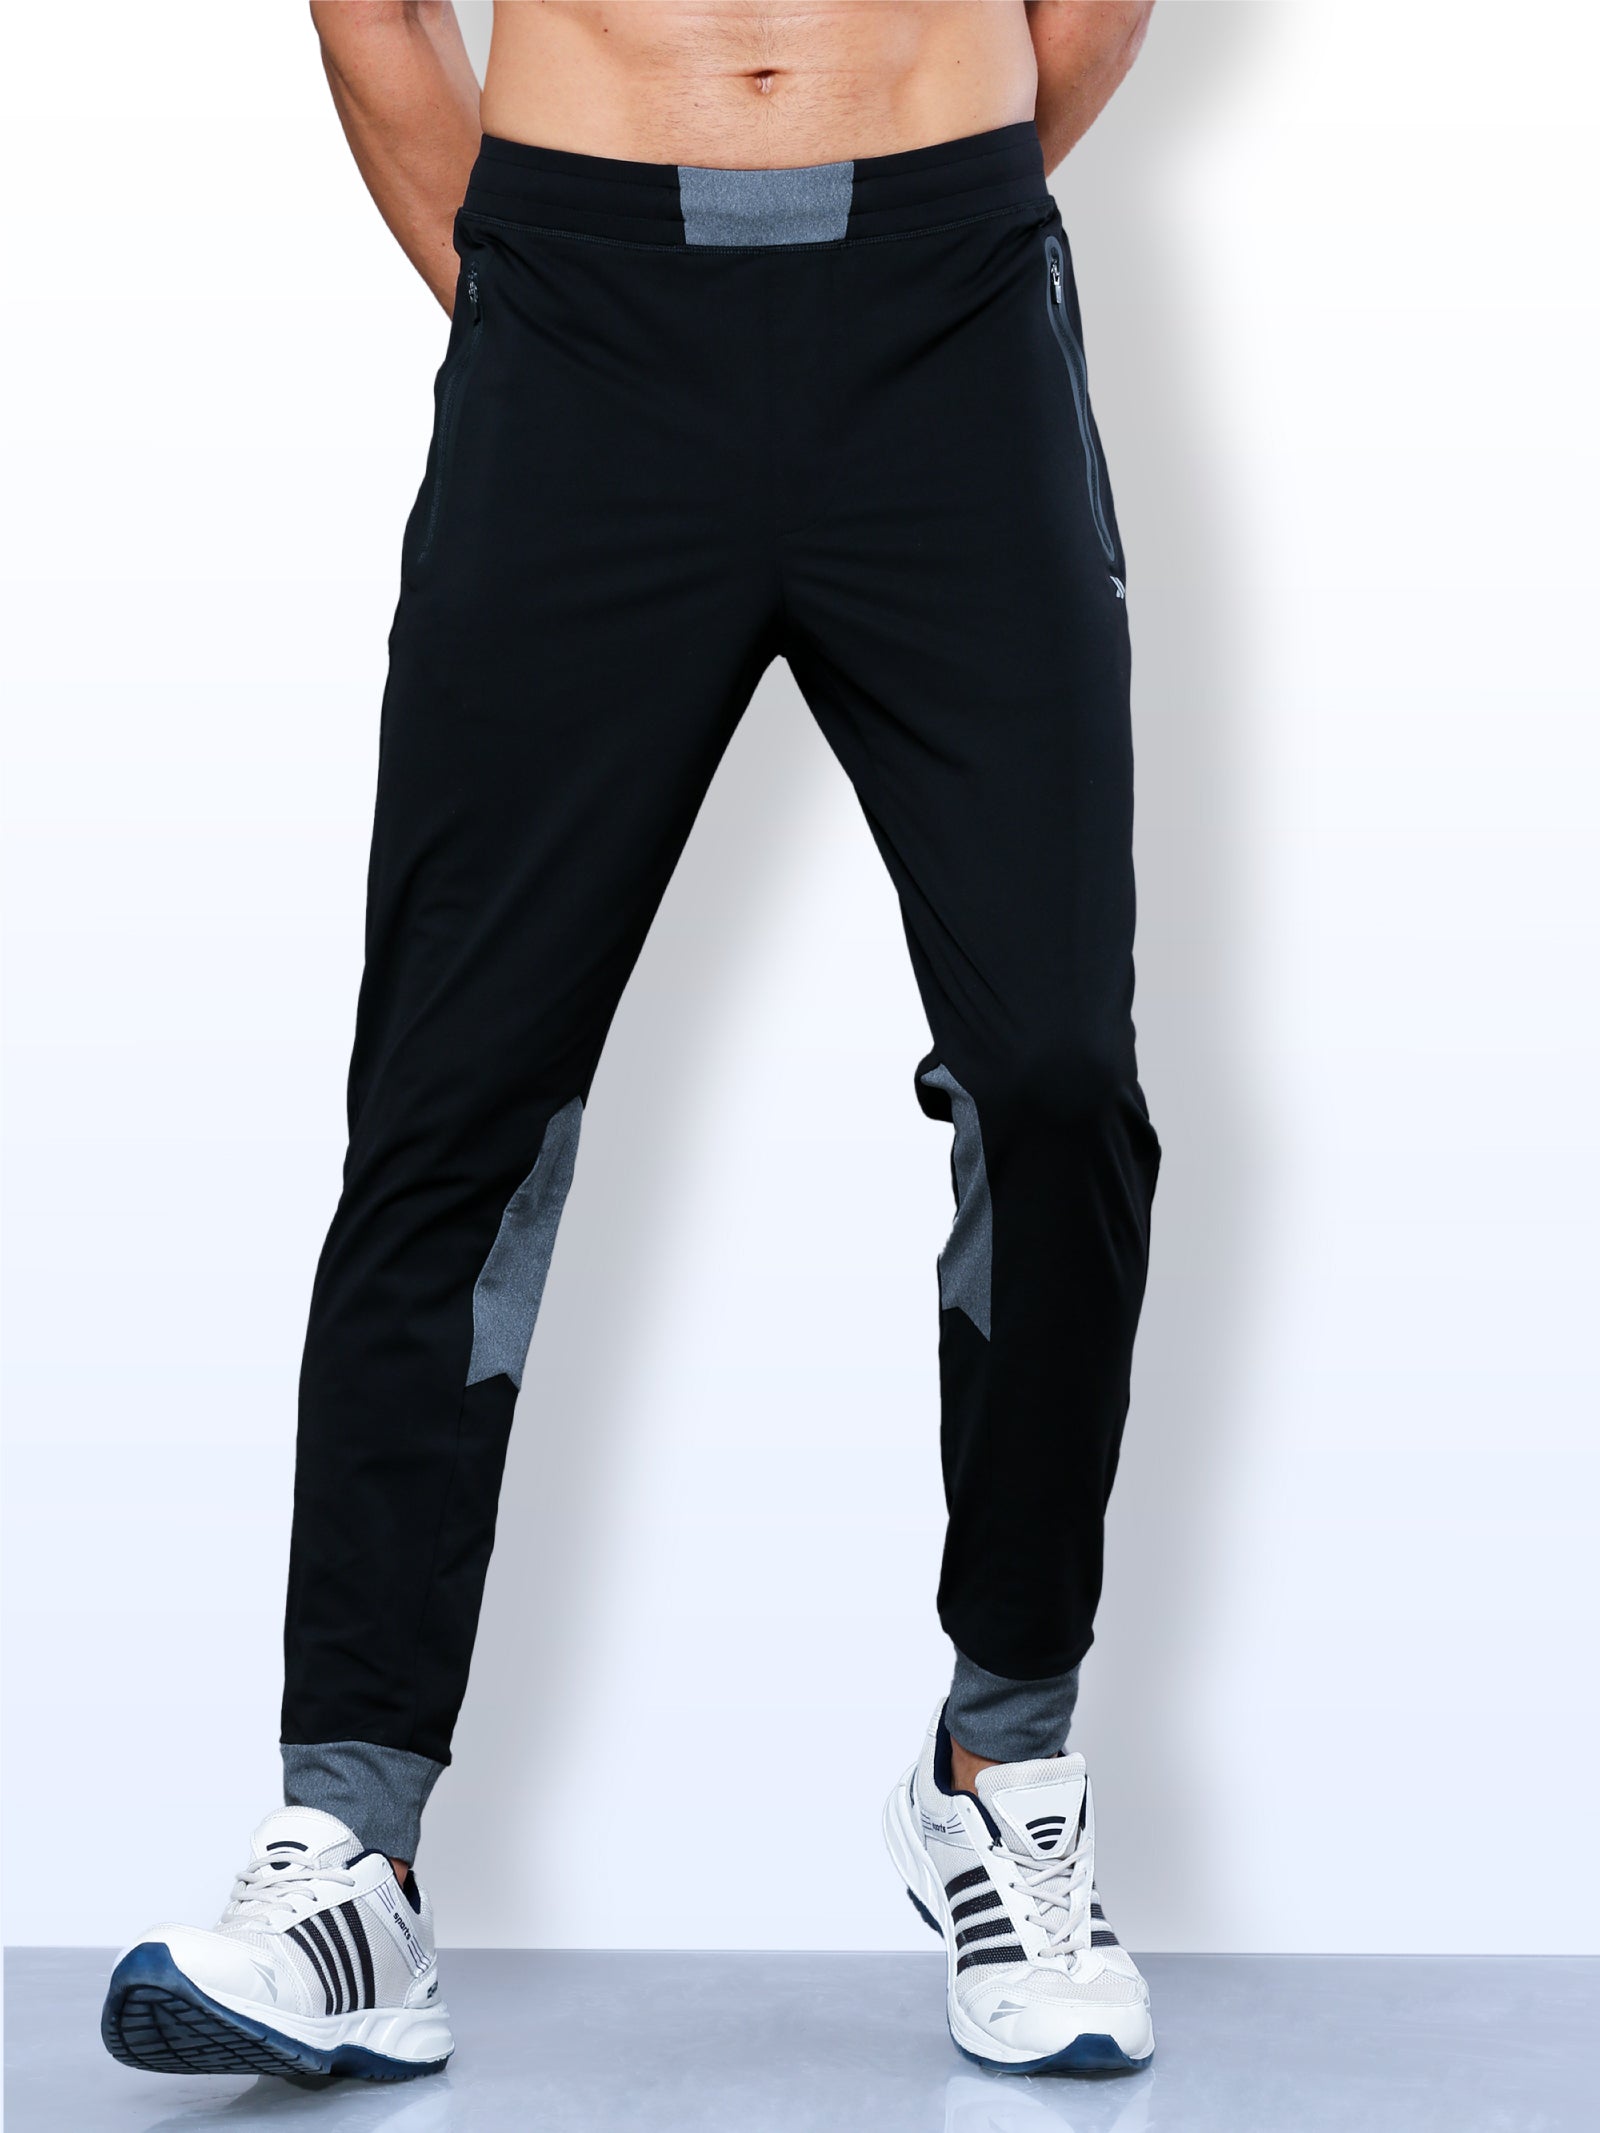 Men's Recycled Performance Shorts With Inner Tights